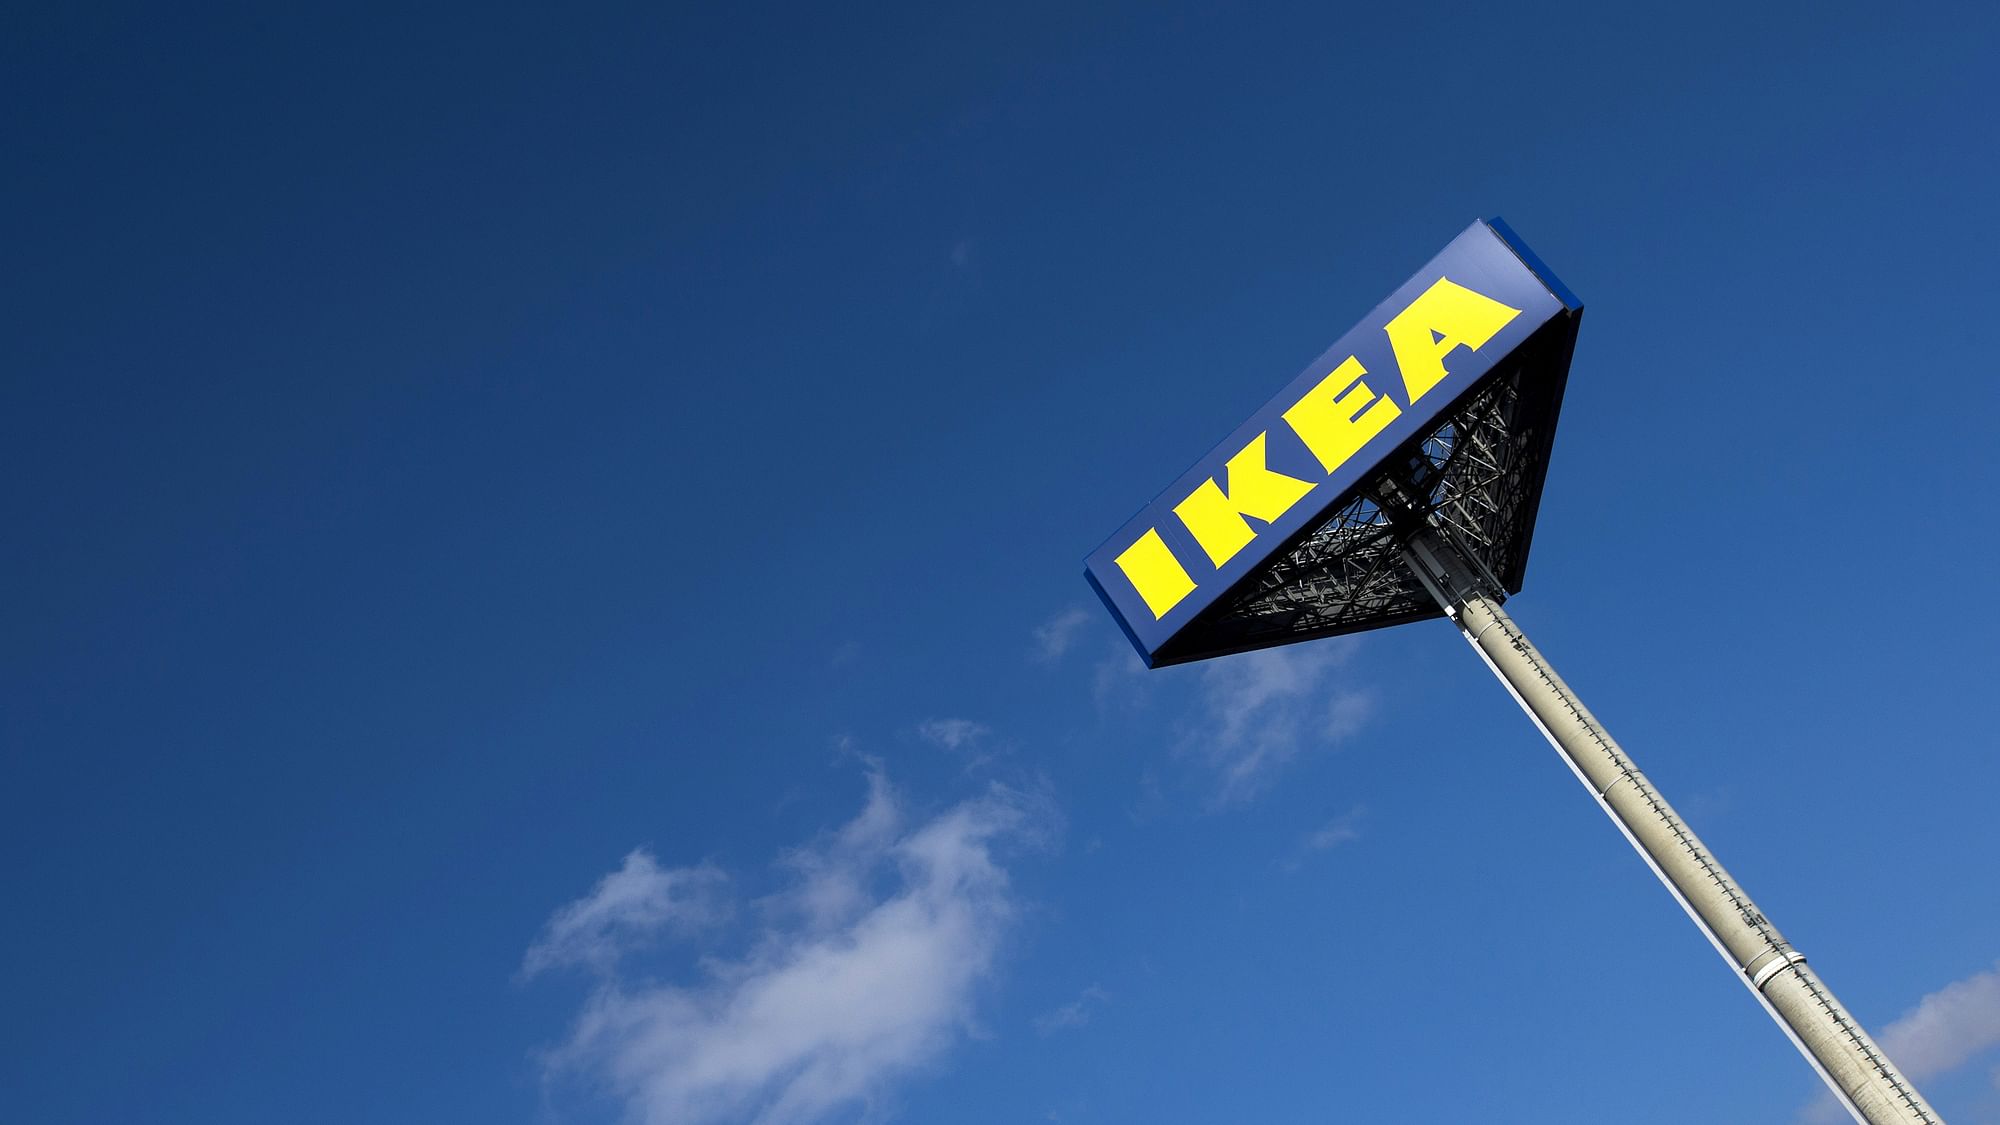 The IKEA logo is seen outside IKEA Concept Center, a furniture store and headquarters of the IKEA brand owner Inter IKEA, in Delft, the Netherlands 16 March  2016. (Photo: Reuters) 